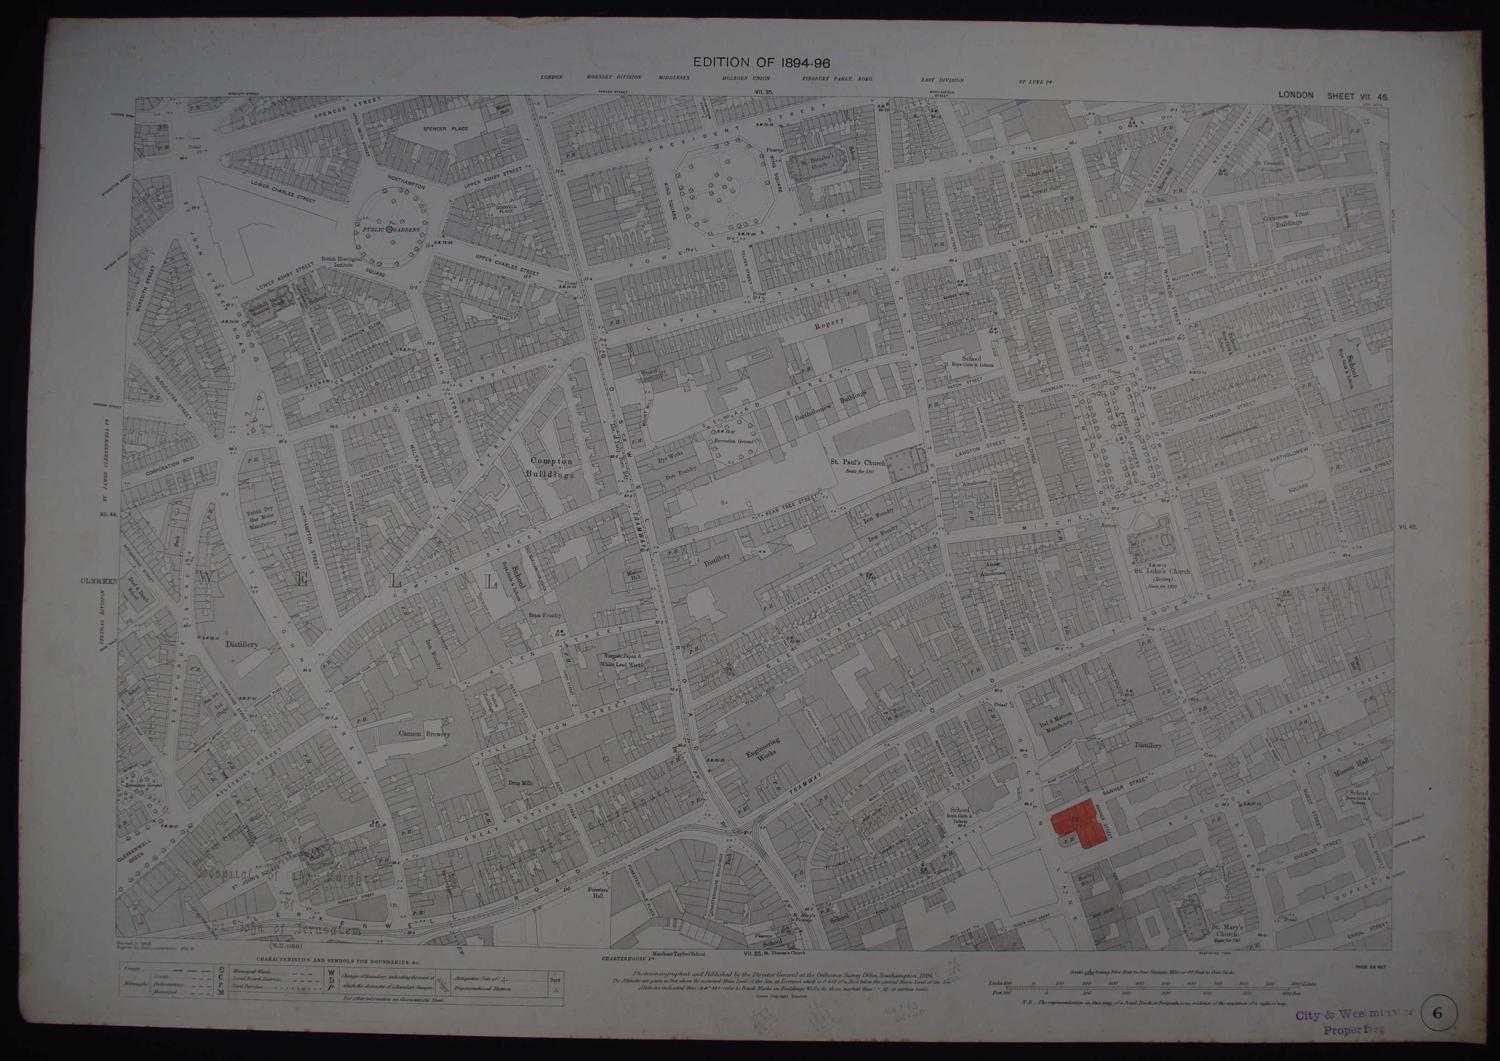 London. Sheet VII. 83. (Westminster) by Ordnance Survey:Edition of 1894-96